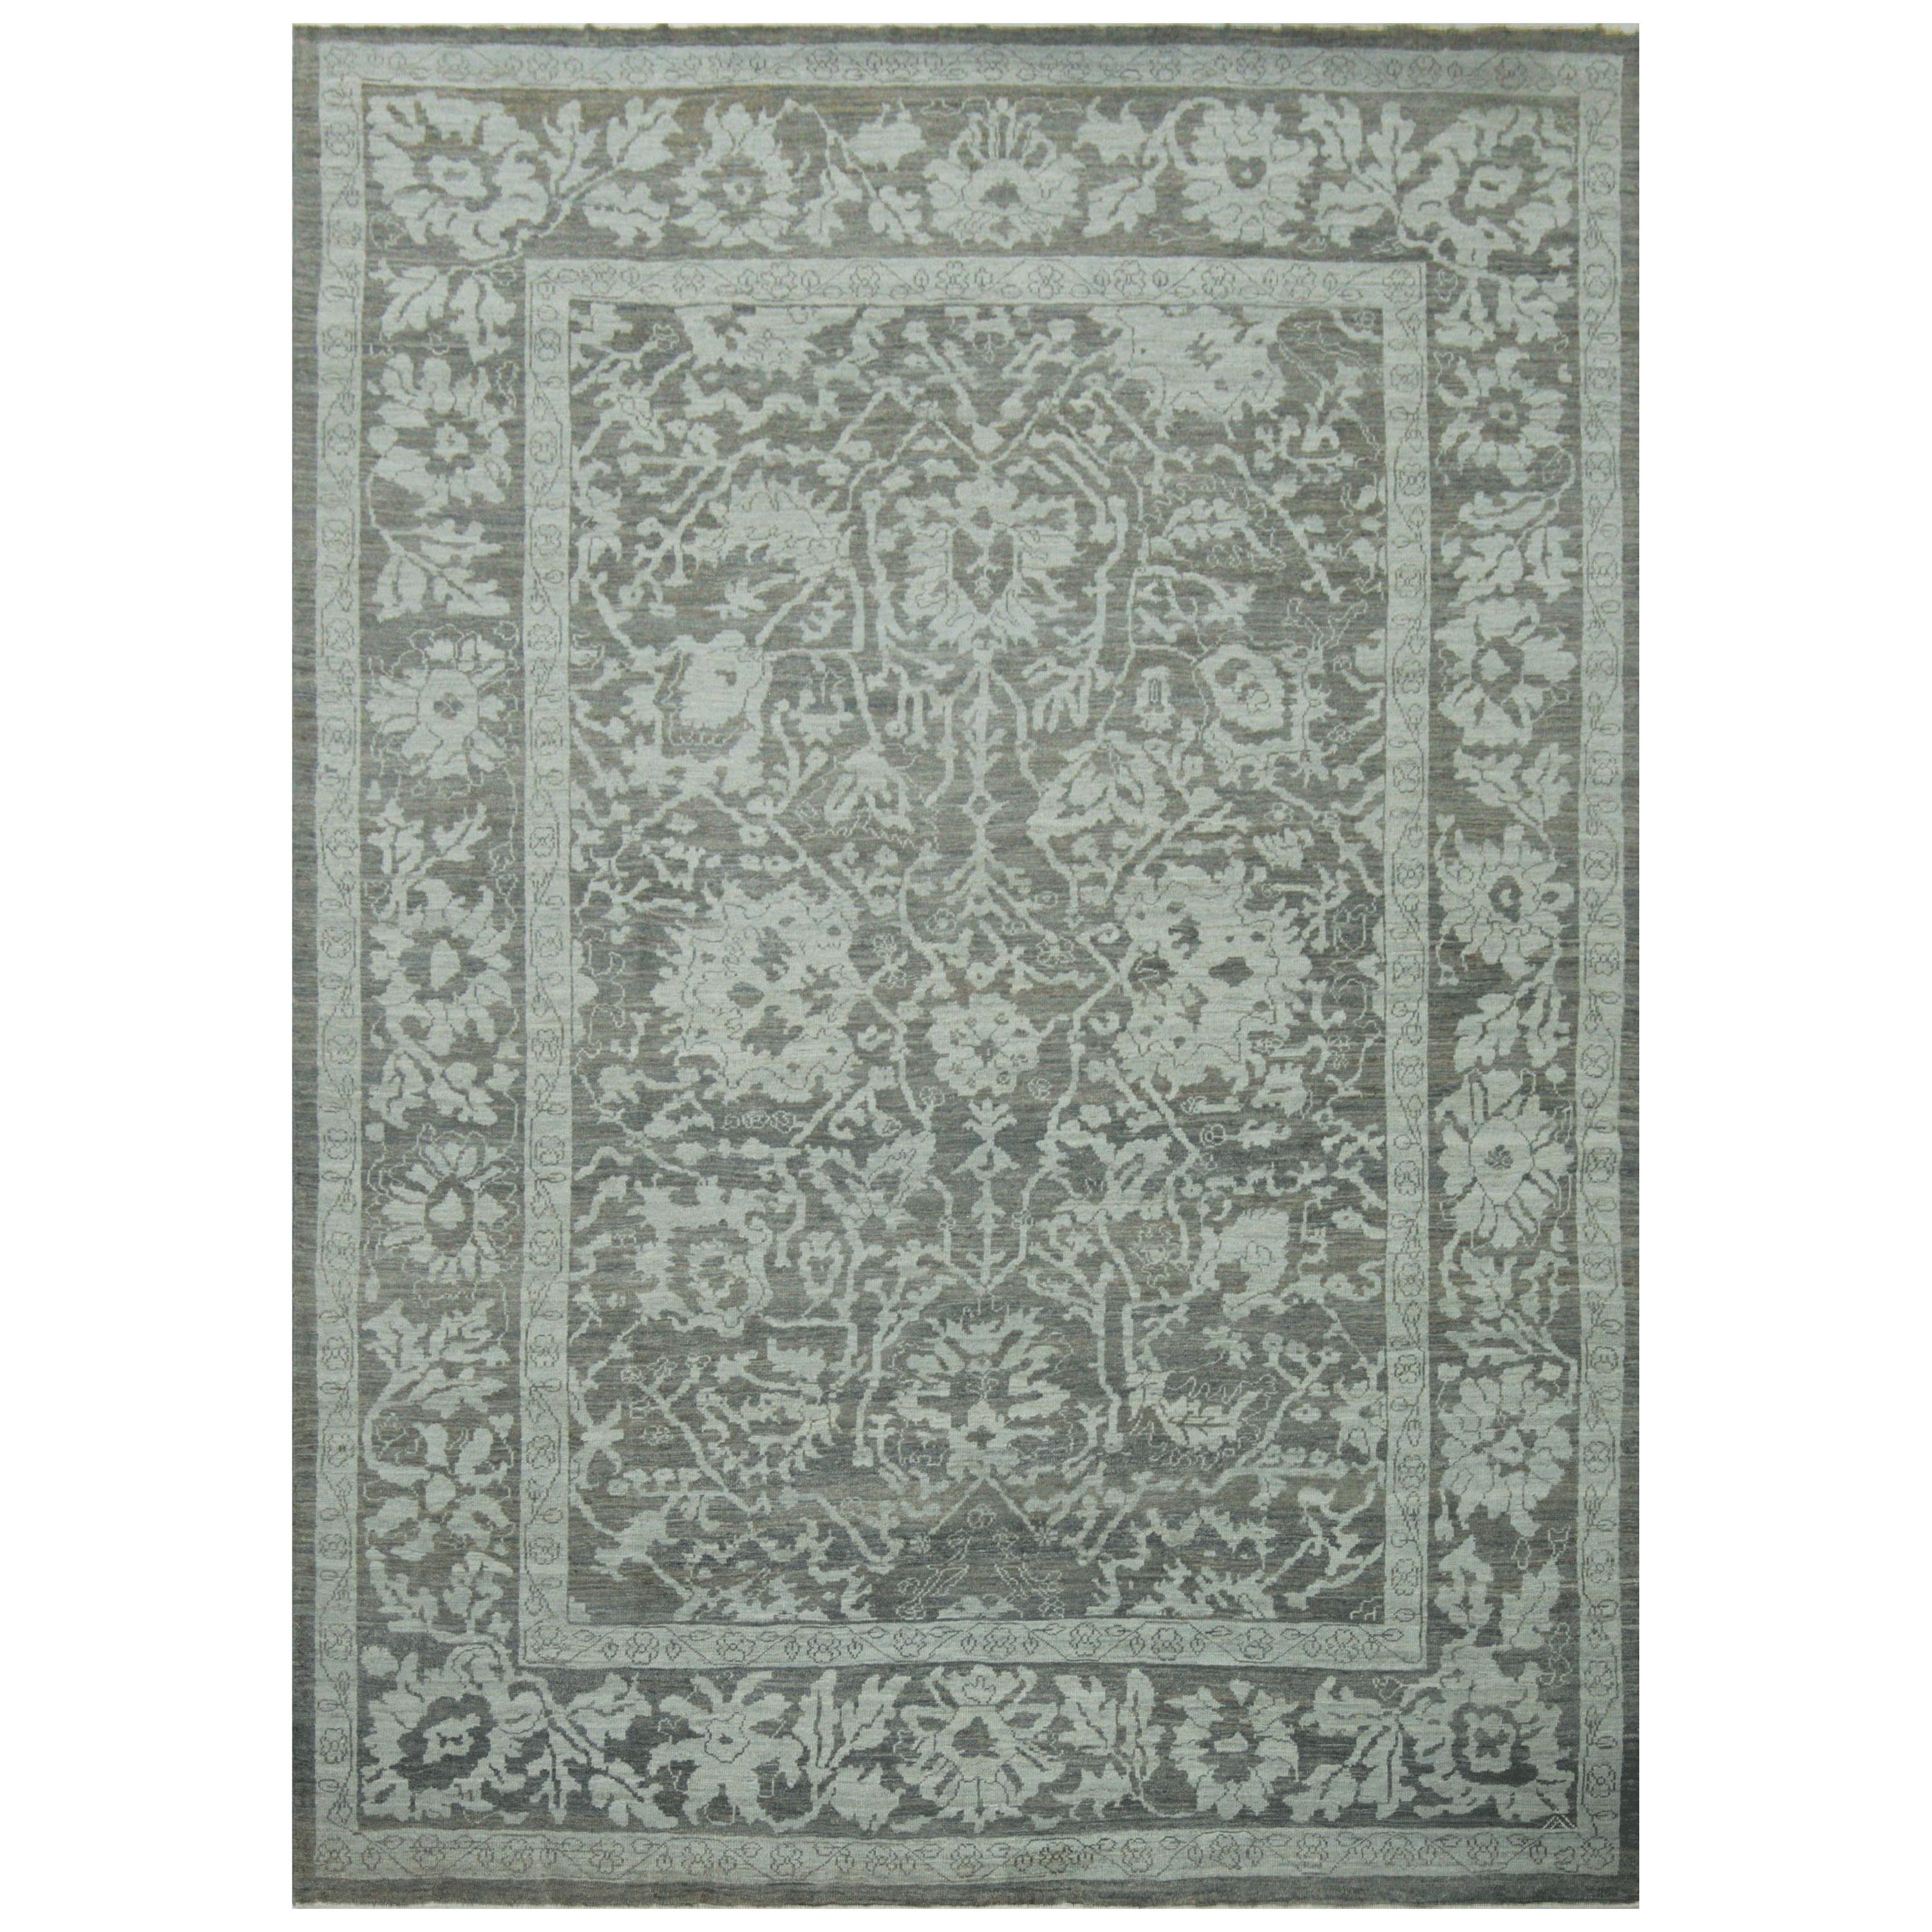 Contemporary Turkish Oushak Rug in Ivory with Gray and Navy Floral Patterns For Sale